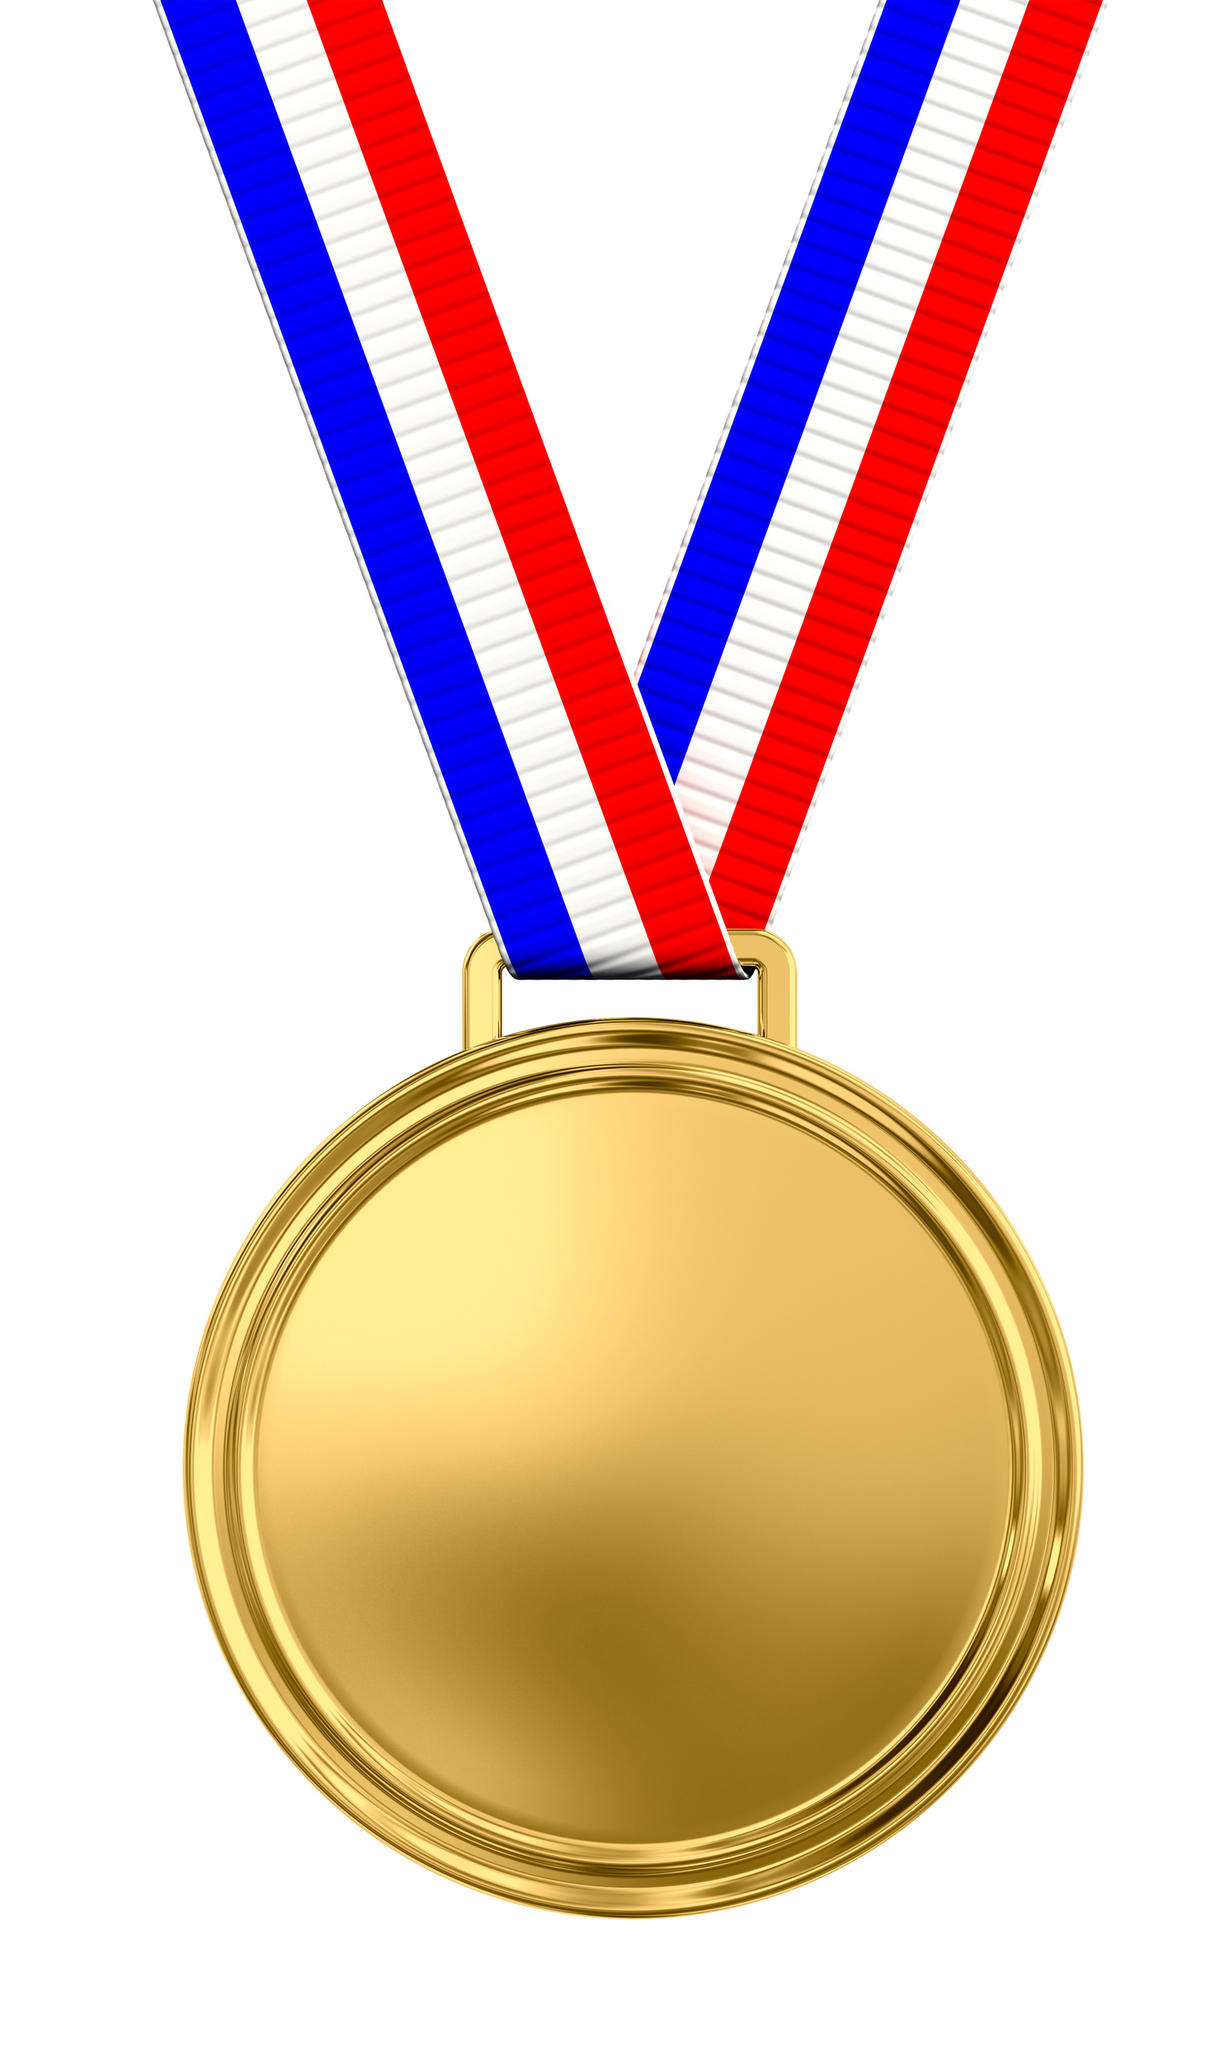 Gold Medal PNG Image High Quality PNG Image